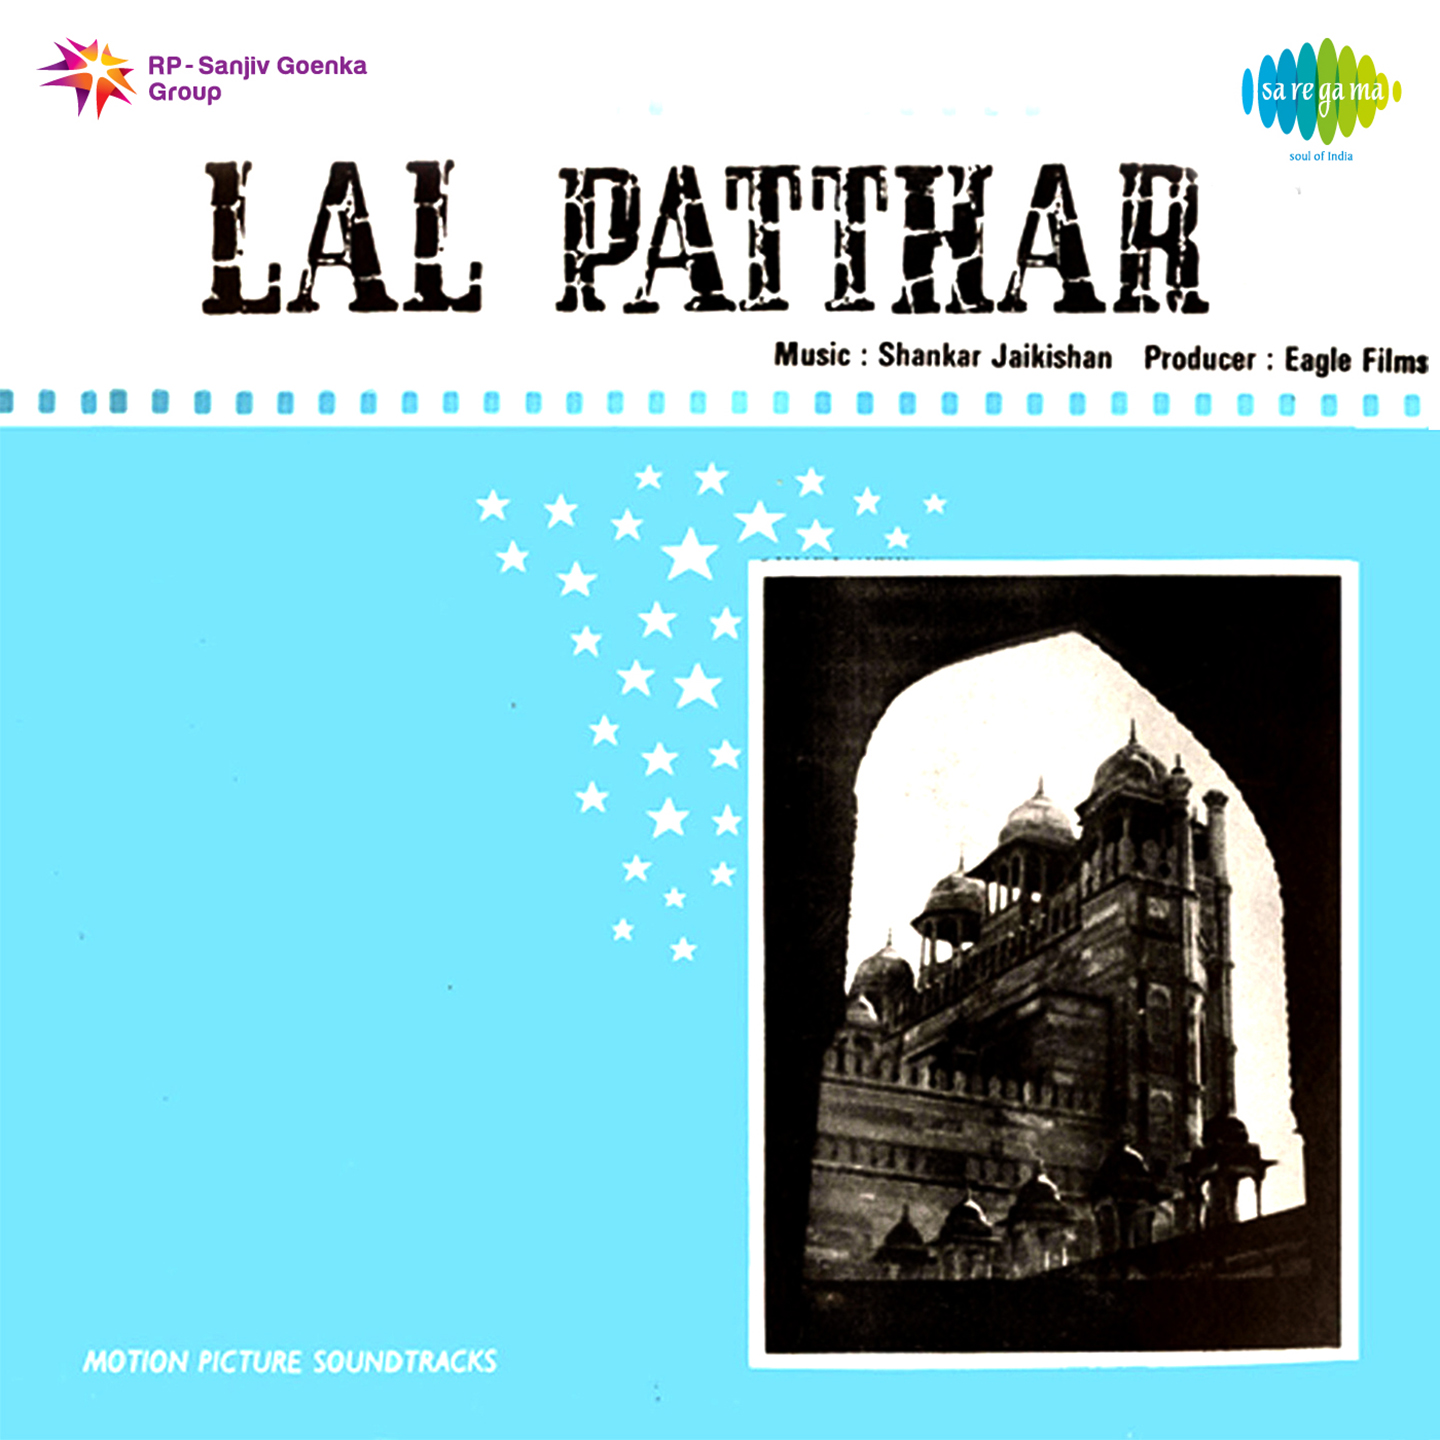 Unke Khayal Aaye To Aate Chale Gaye Memorable Dialogues From Lal Patthar